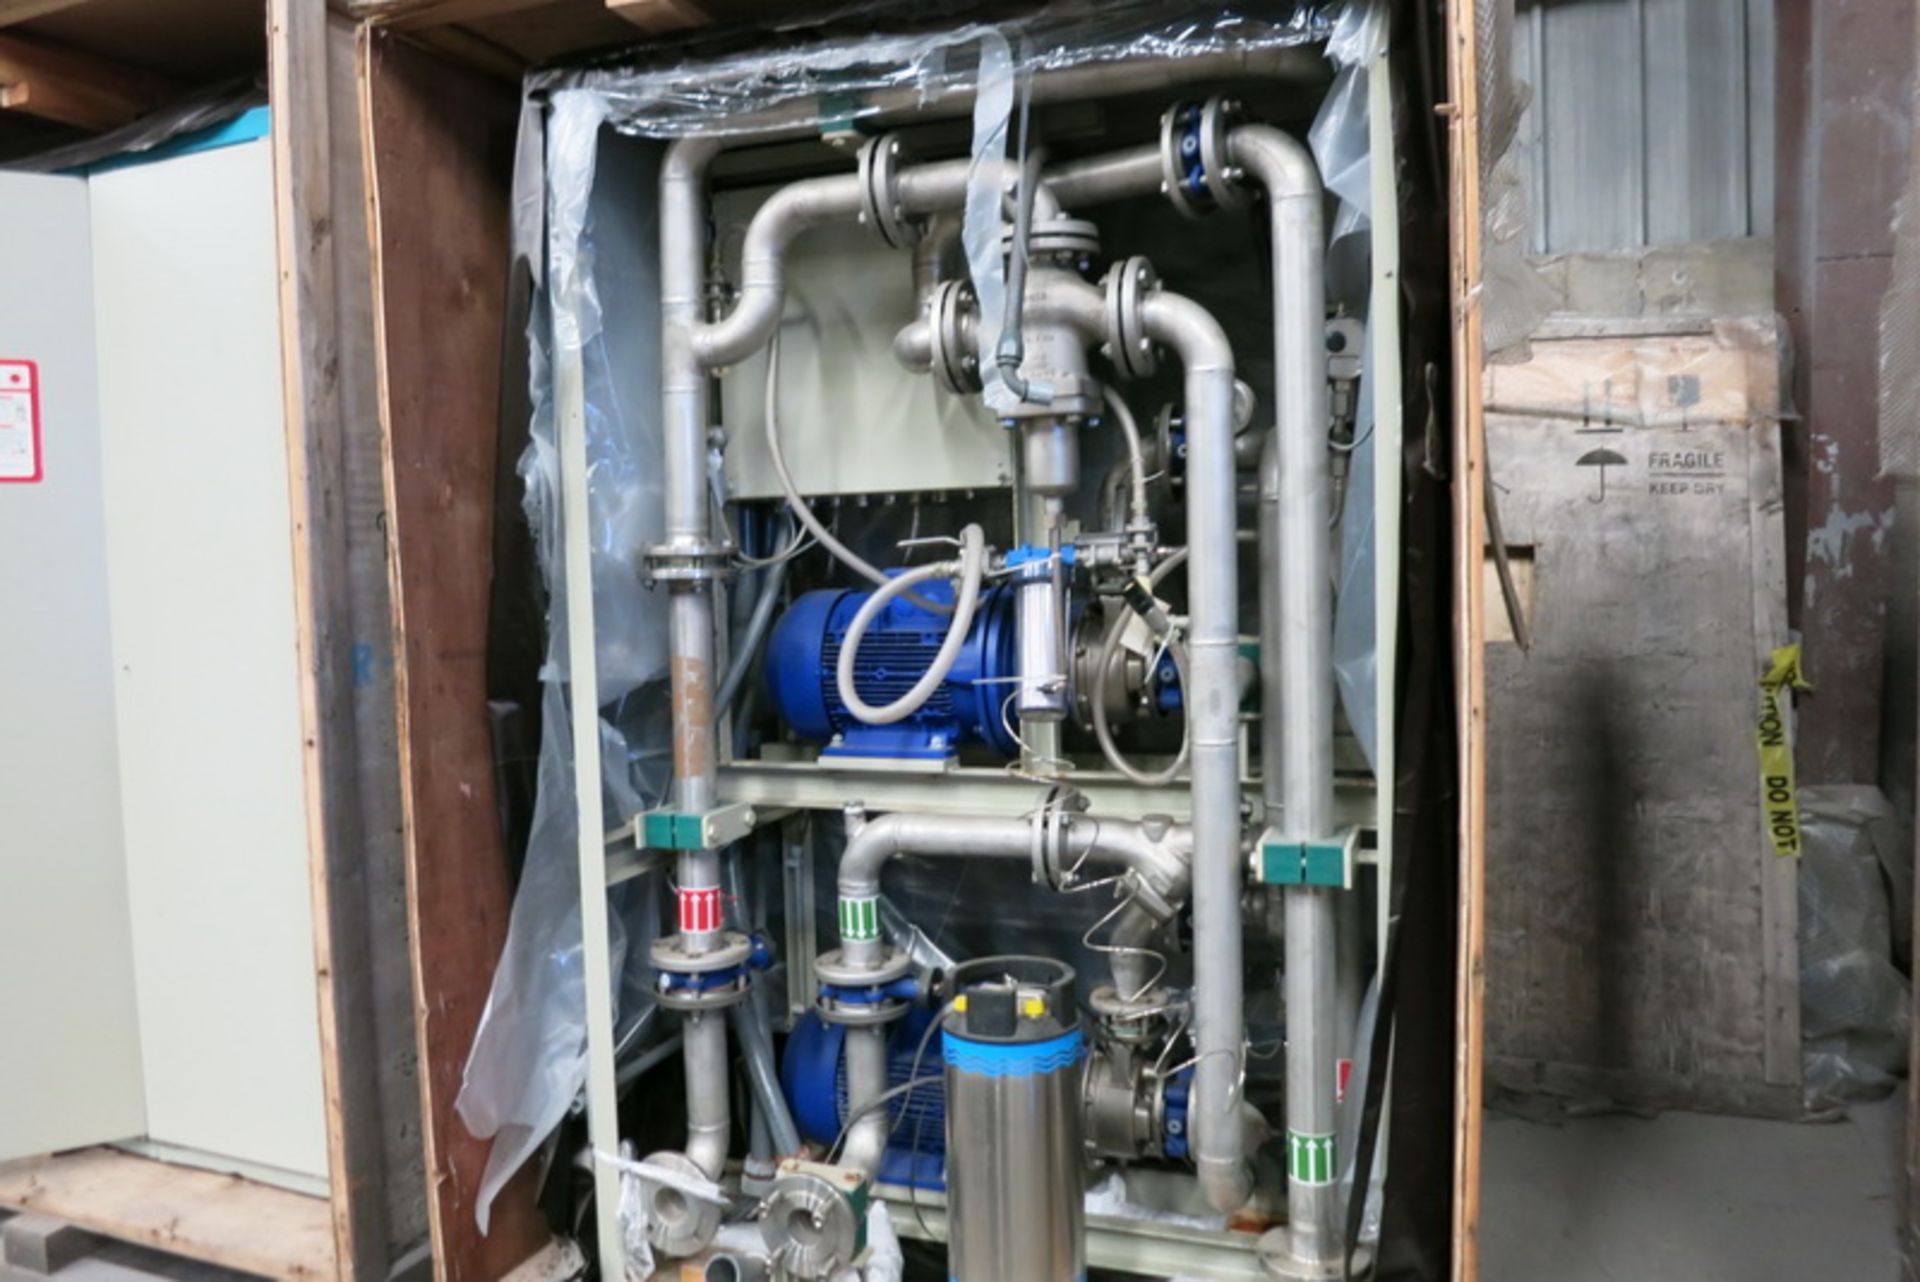 [Lot] Siemens water cooling / filtering system, model ZBW9370-9HPA6-Z, s/n 98/022949BP, with (2) - Image 3 of 3